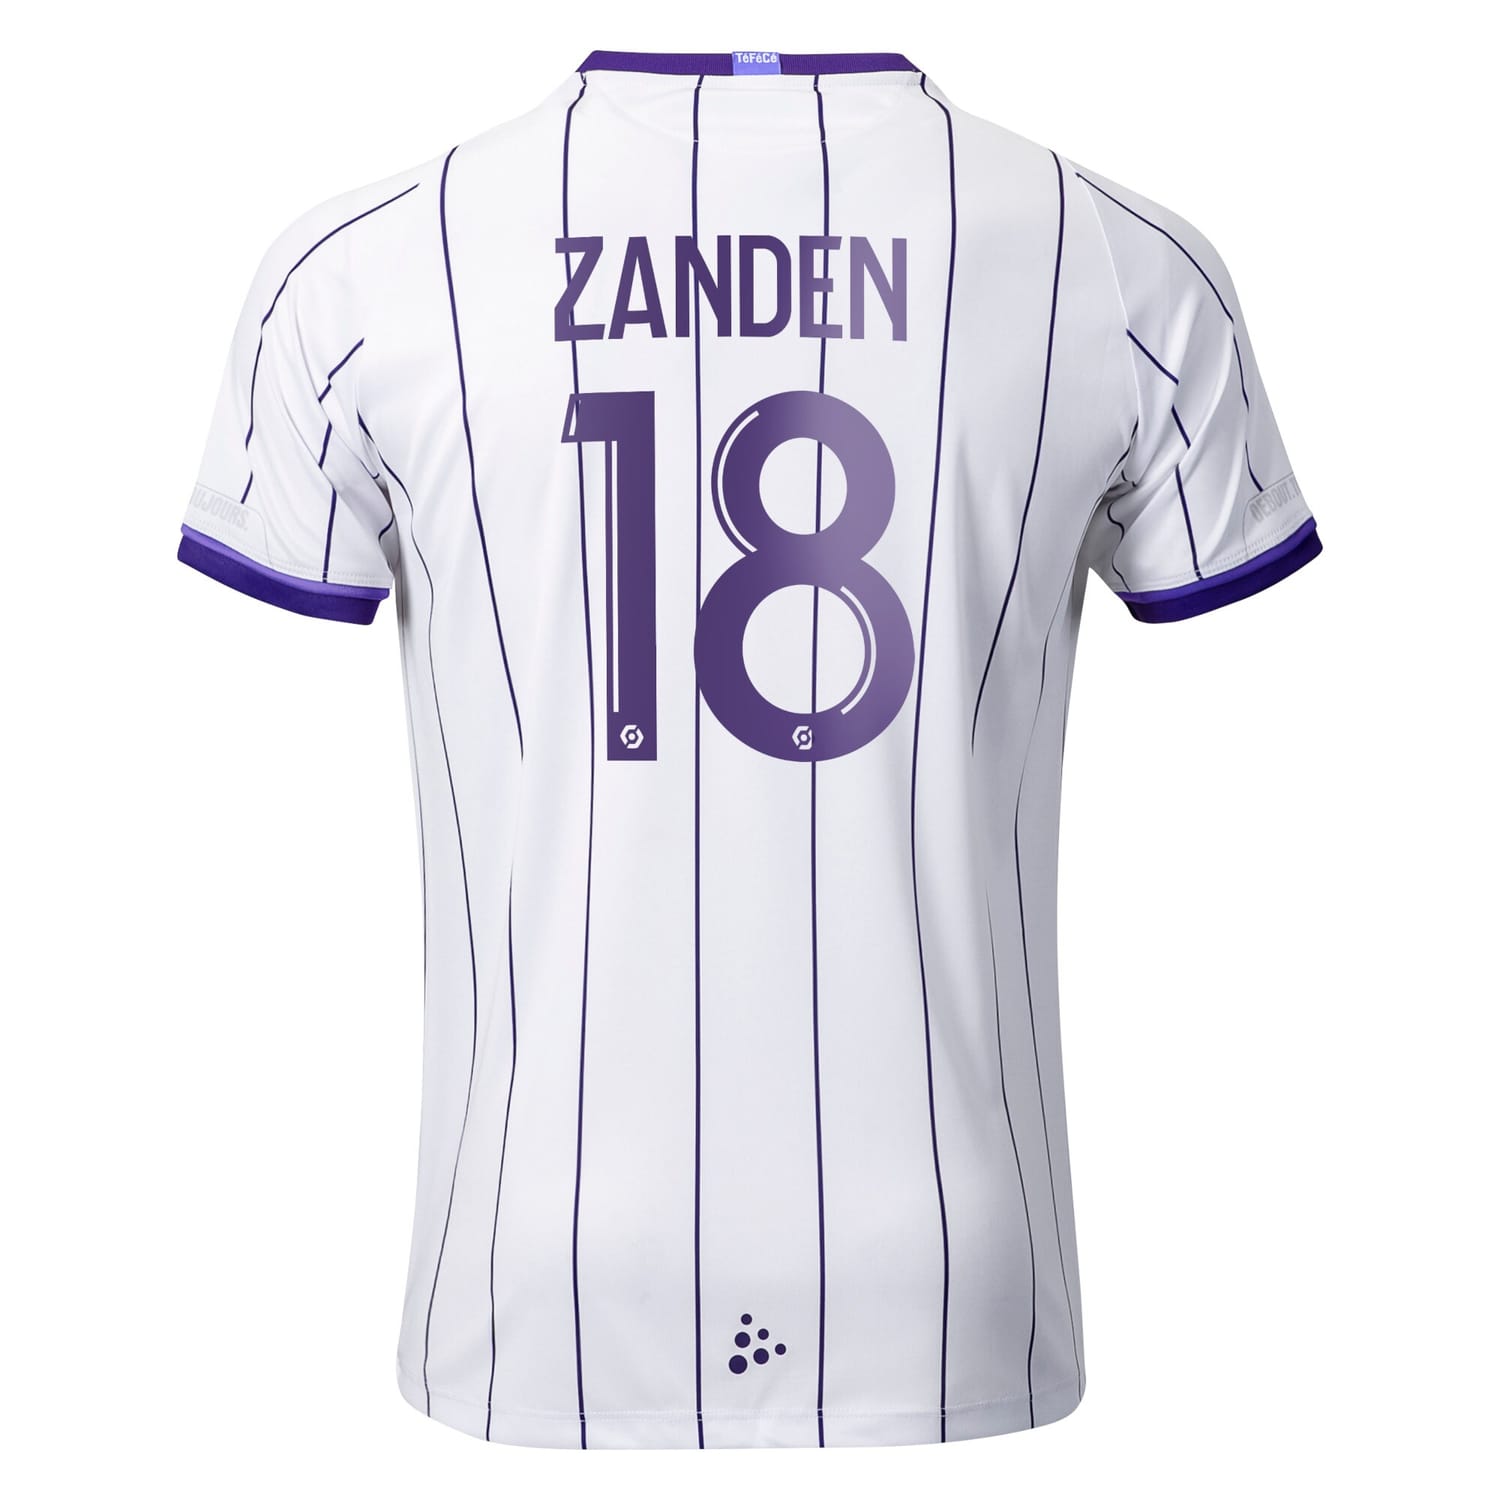 Ligue 1 Toulouse Home Jersey Shirt 2022-23 player Zanden 18 printing for Women